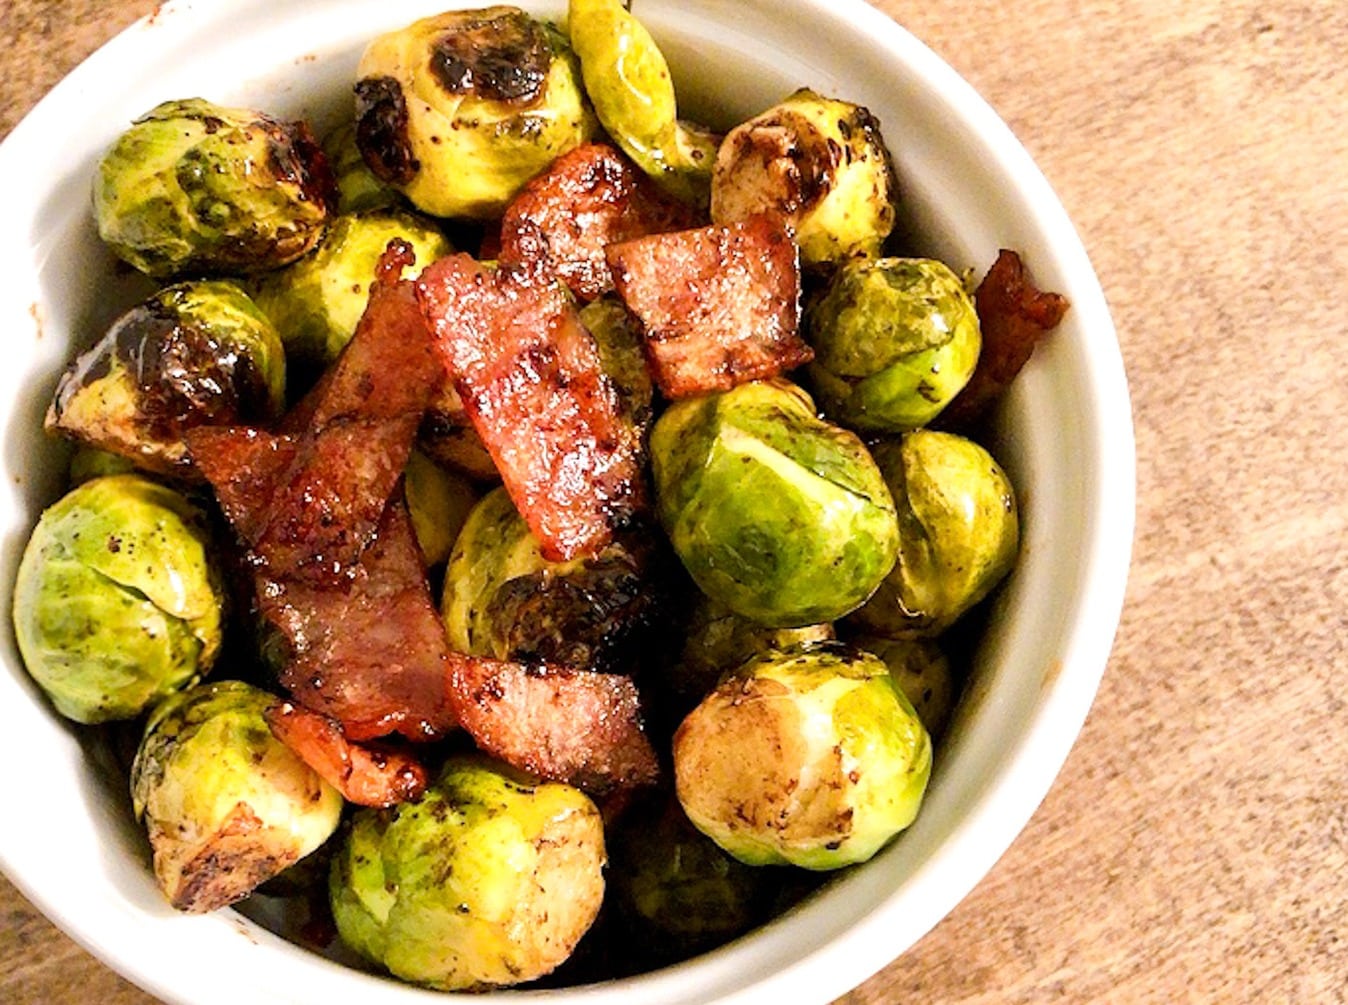 Crispy Pan Fried Brussel Sprouts Recipe with Bacon and Balsamic Vinegar